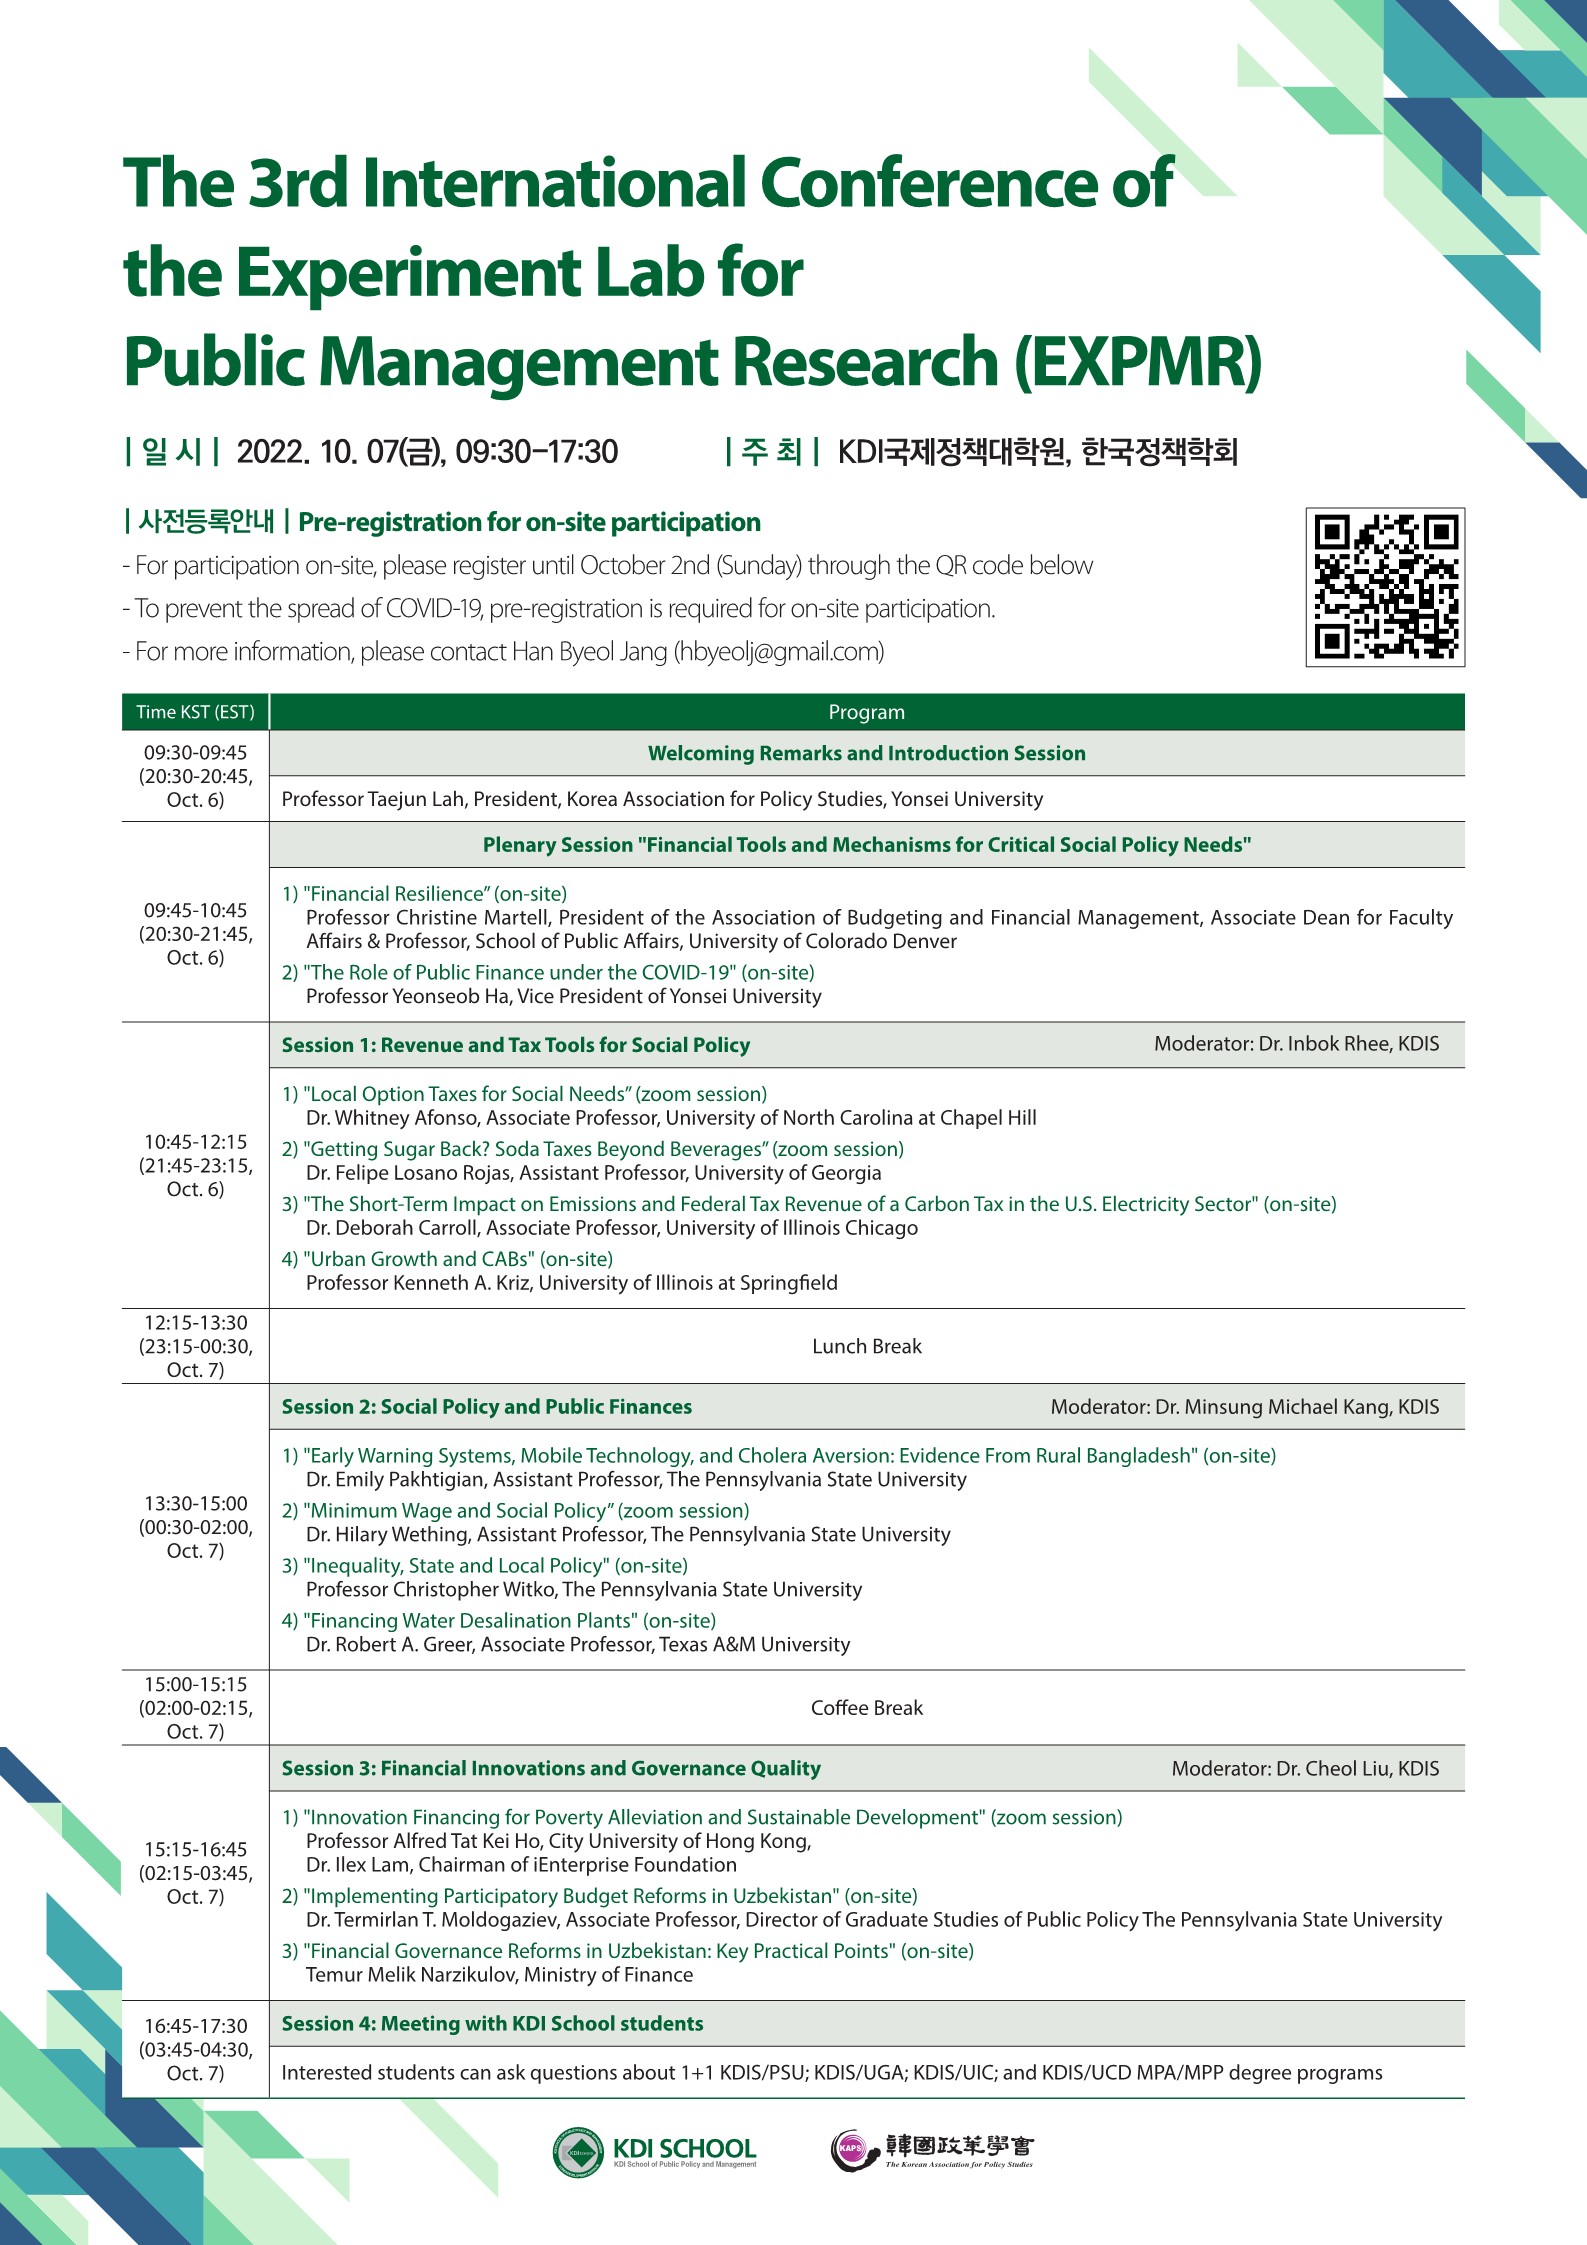 The 3rd International Conference of the Experiment Lab for Public Management Research (ExPMR)